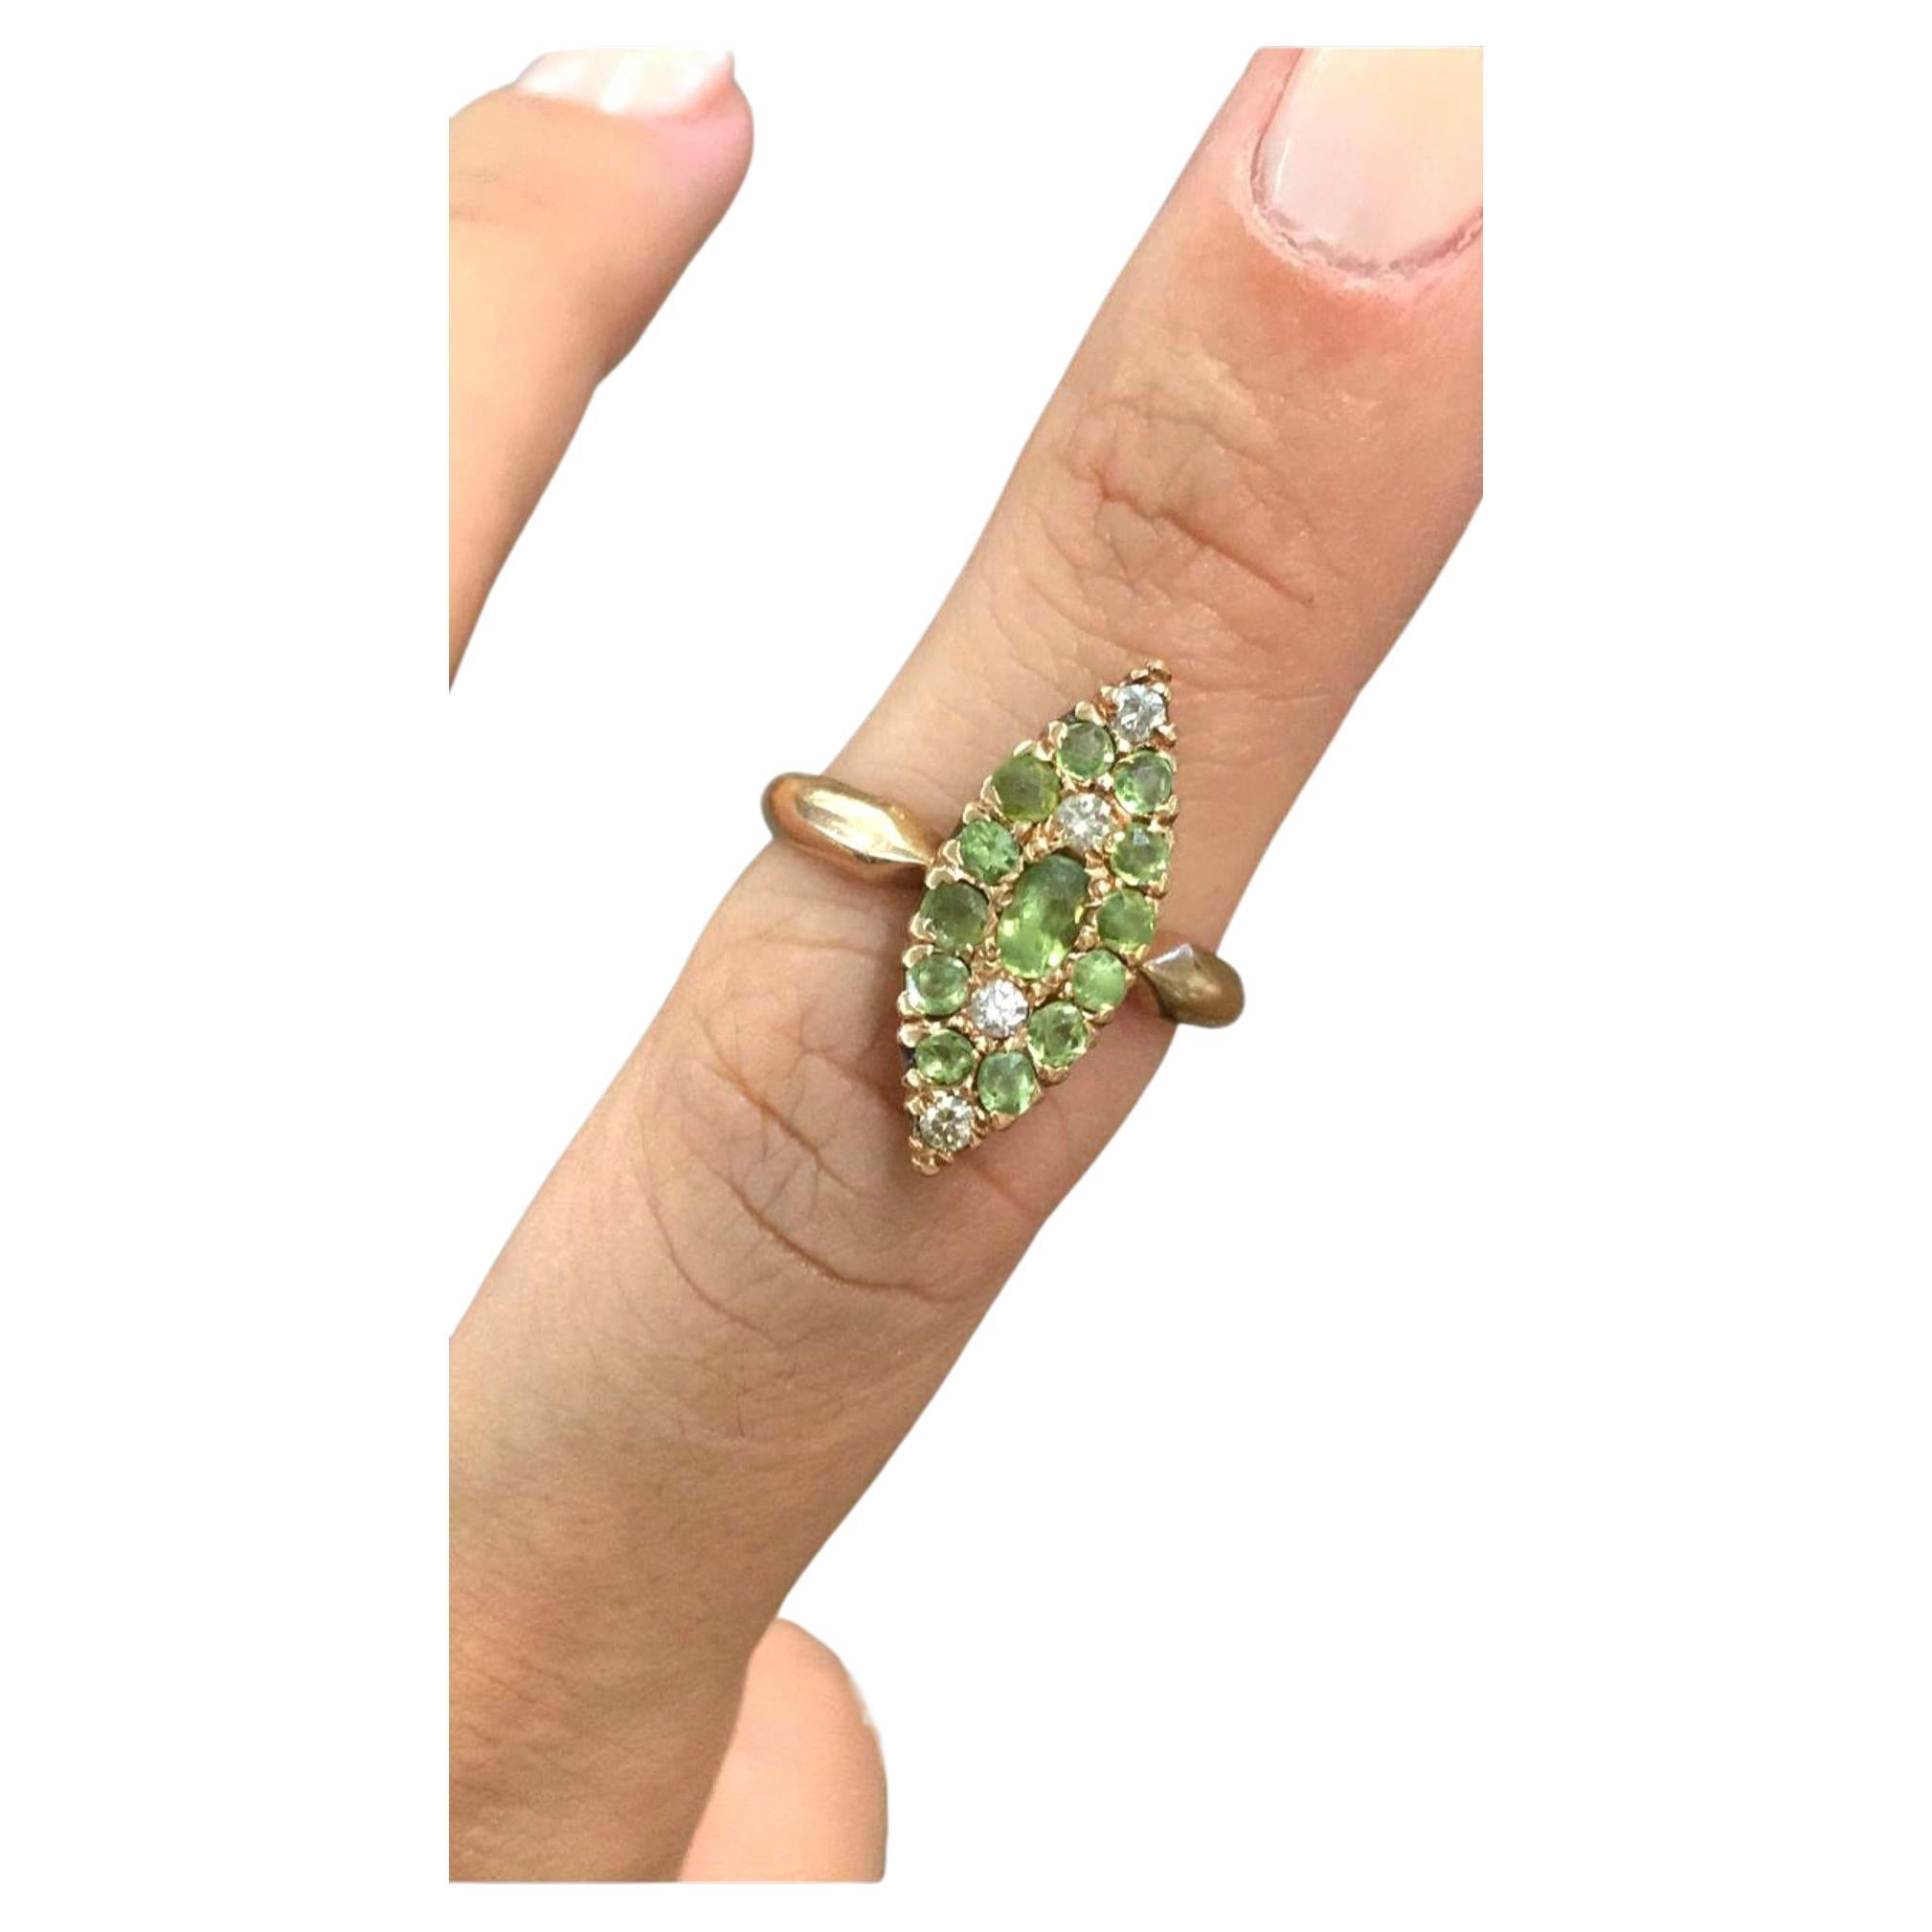 Antique russian ring in navviet style with green demantoid stones and old mine cut diamond in 14k gold setting ring was made in moscow during the imperial russian era 1907/1910.c hall marked 56 imperial russian gold standard and moscow assayer